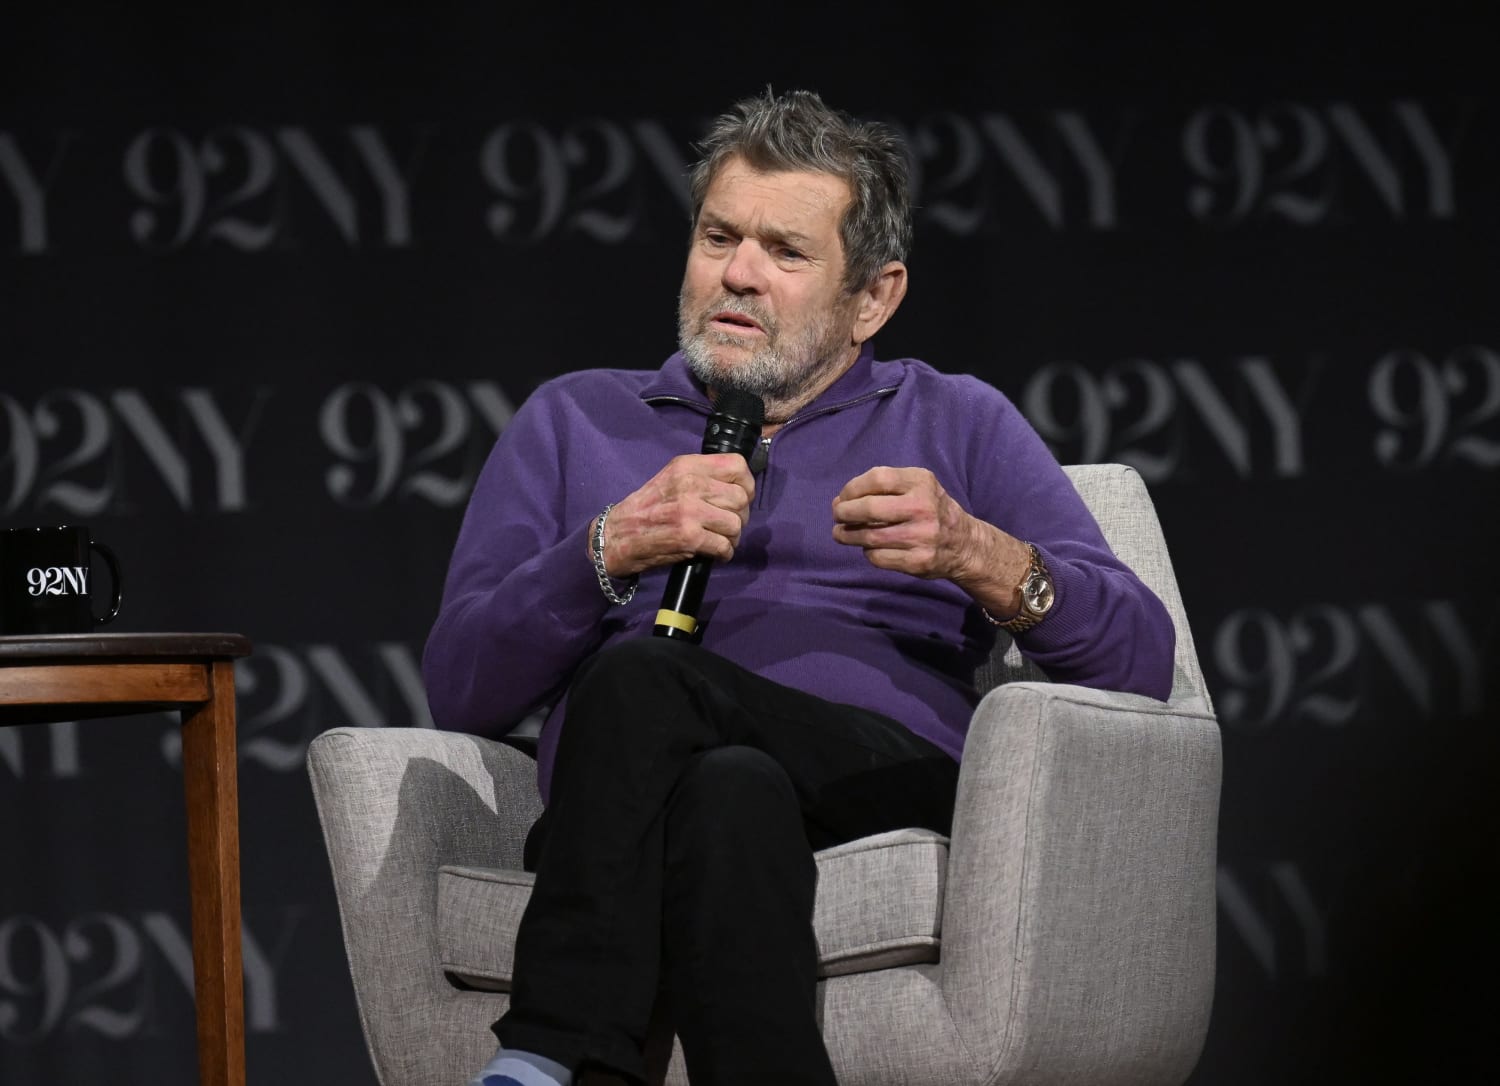 Jann Wenner was removed from the Rock & Roll Hall of Fame panel after the interview